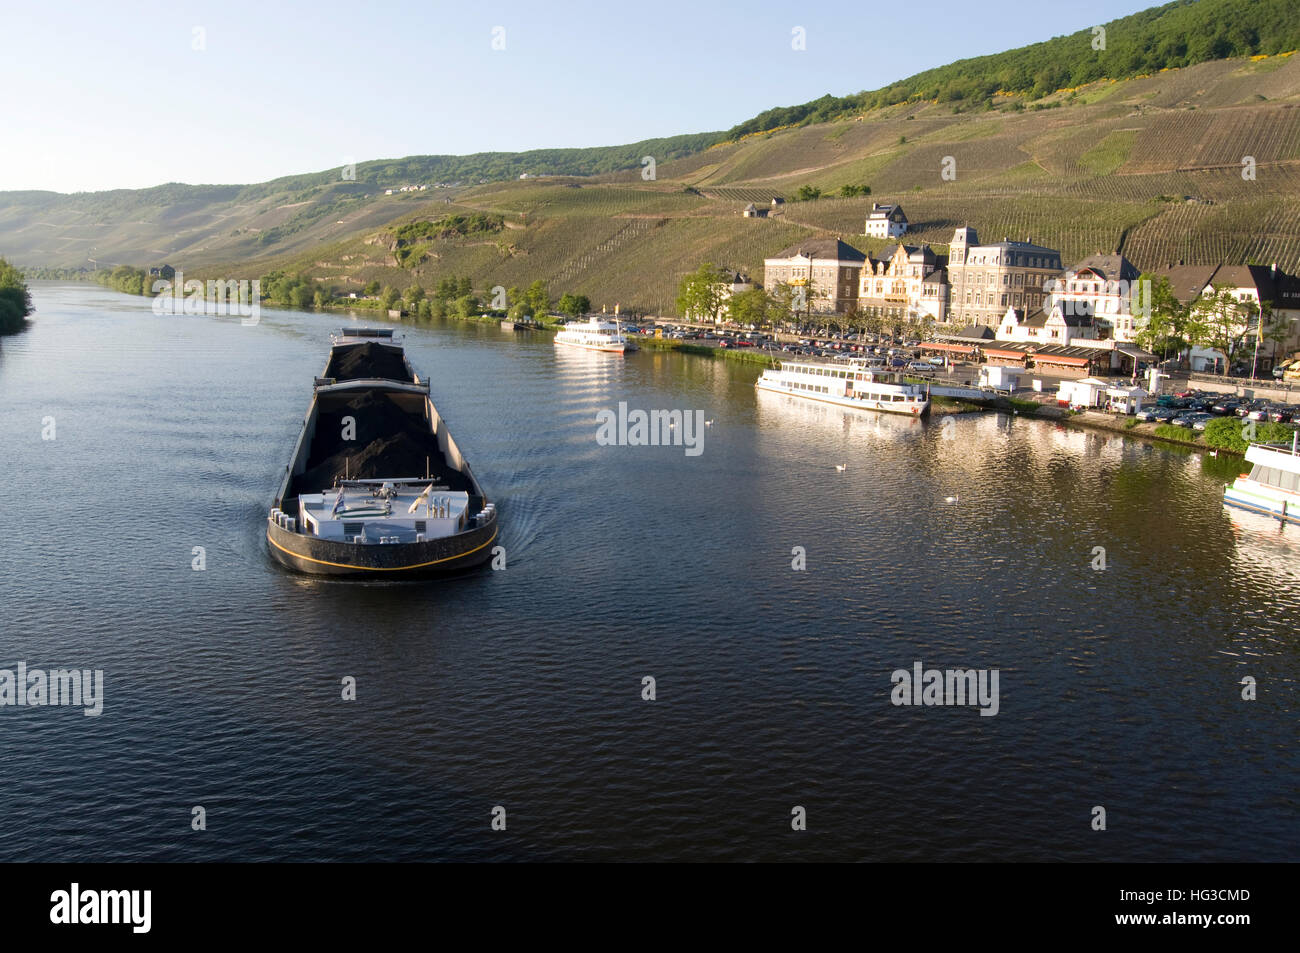 A barge carrying coal along the Moselle river in Germany Stock Photo